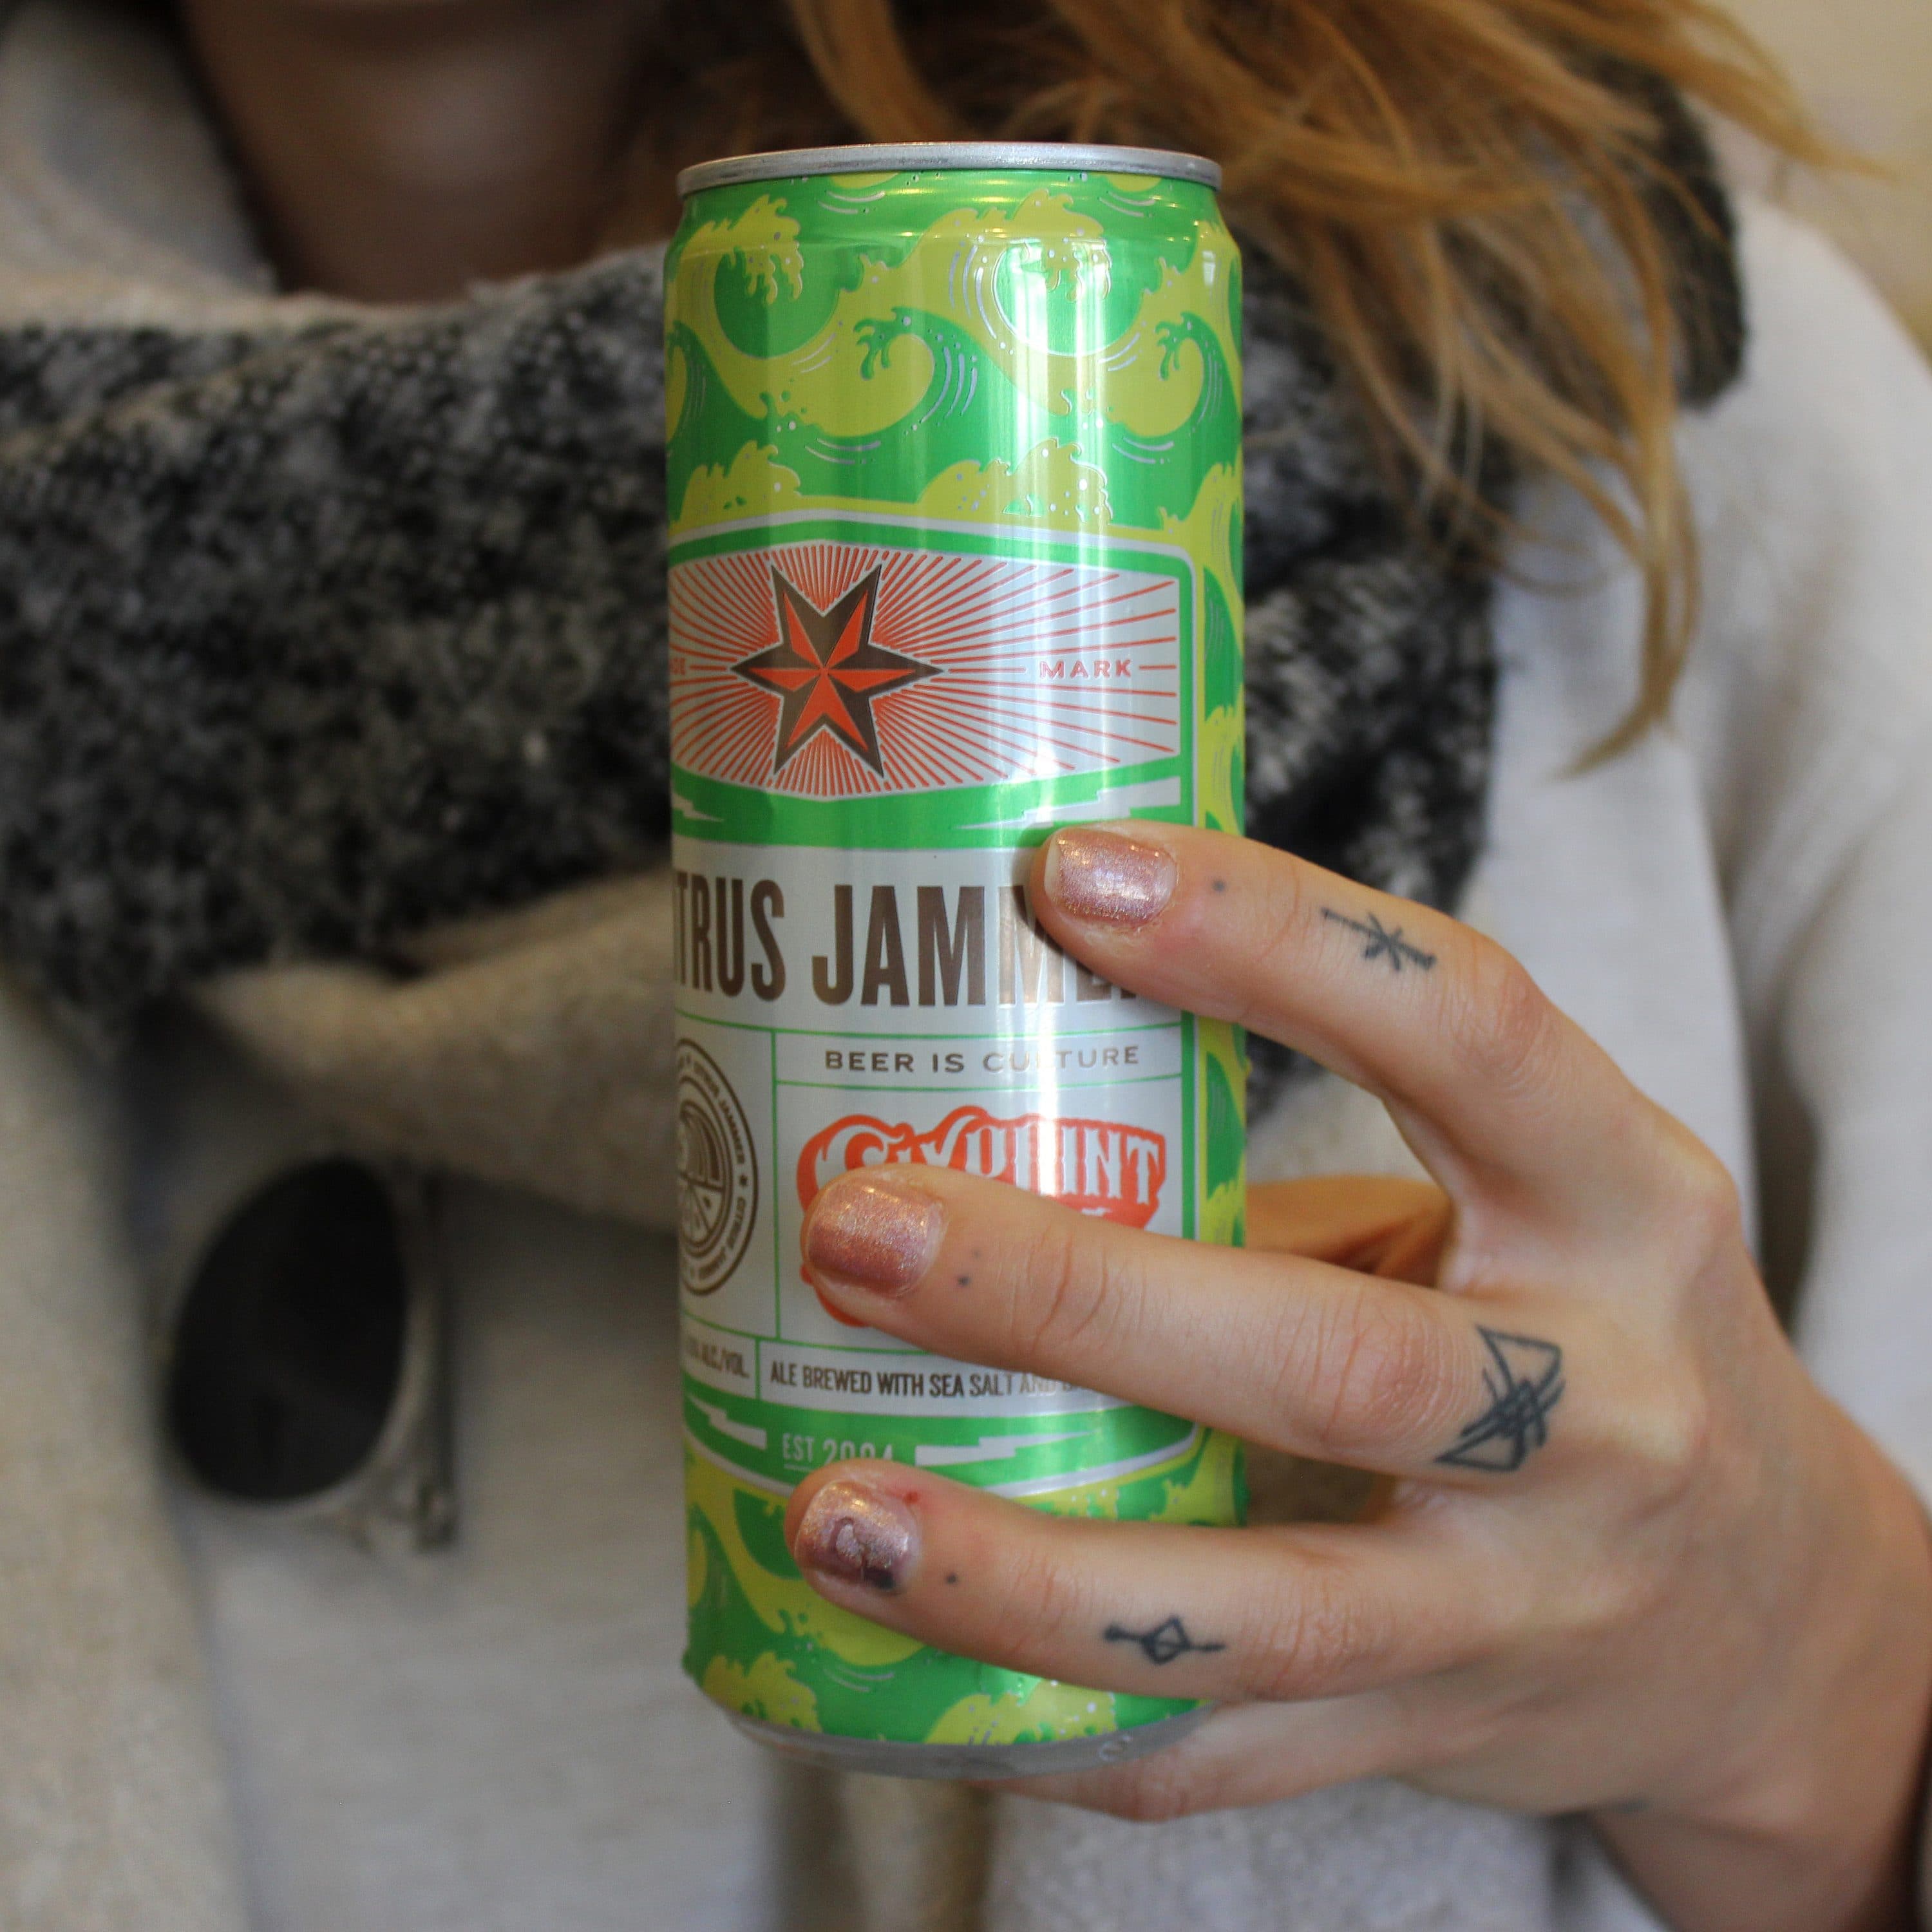 A person with shoulder-length hair holds a can of citrus jam beer covered in a green, yellow, and white design. The person wears a light gray and white sweater with a gray scarf. Their fingers have tattoos and glittery nail polish.